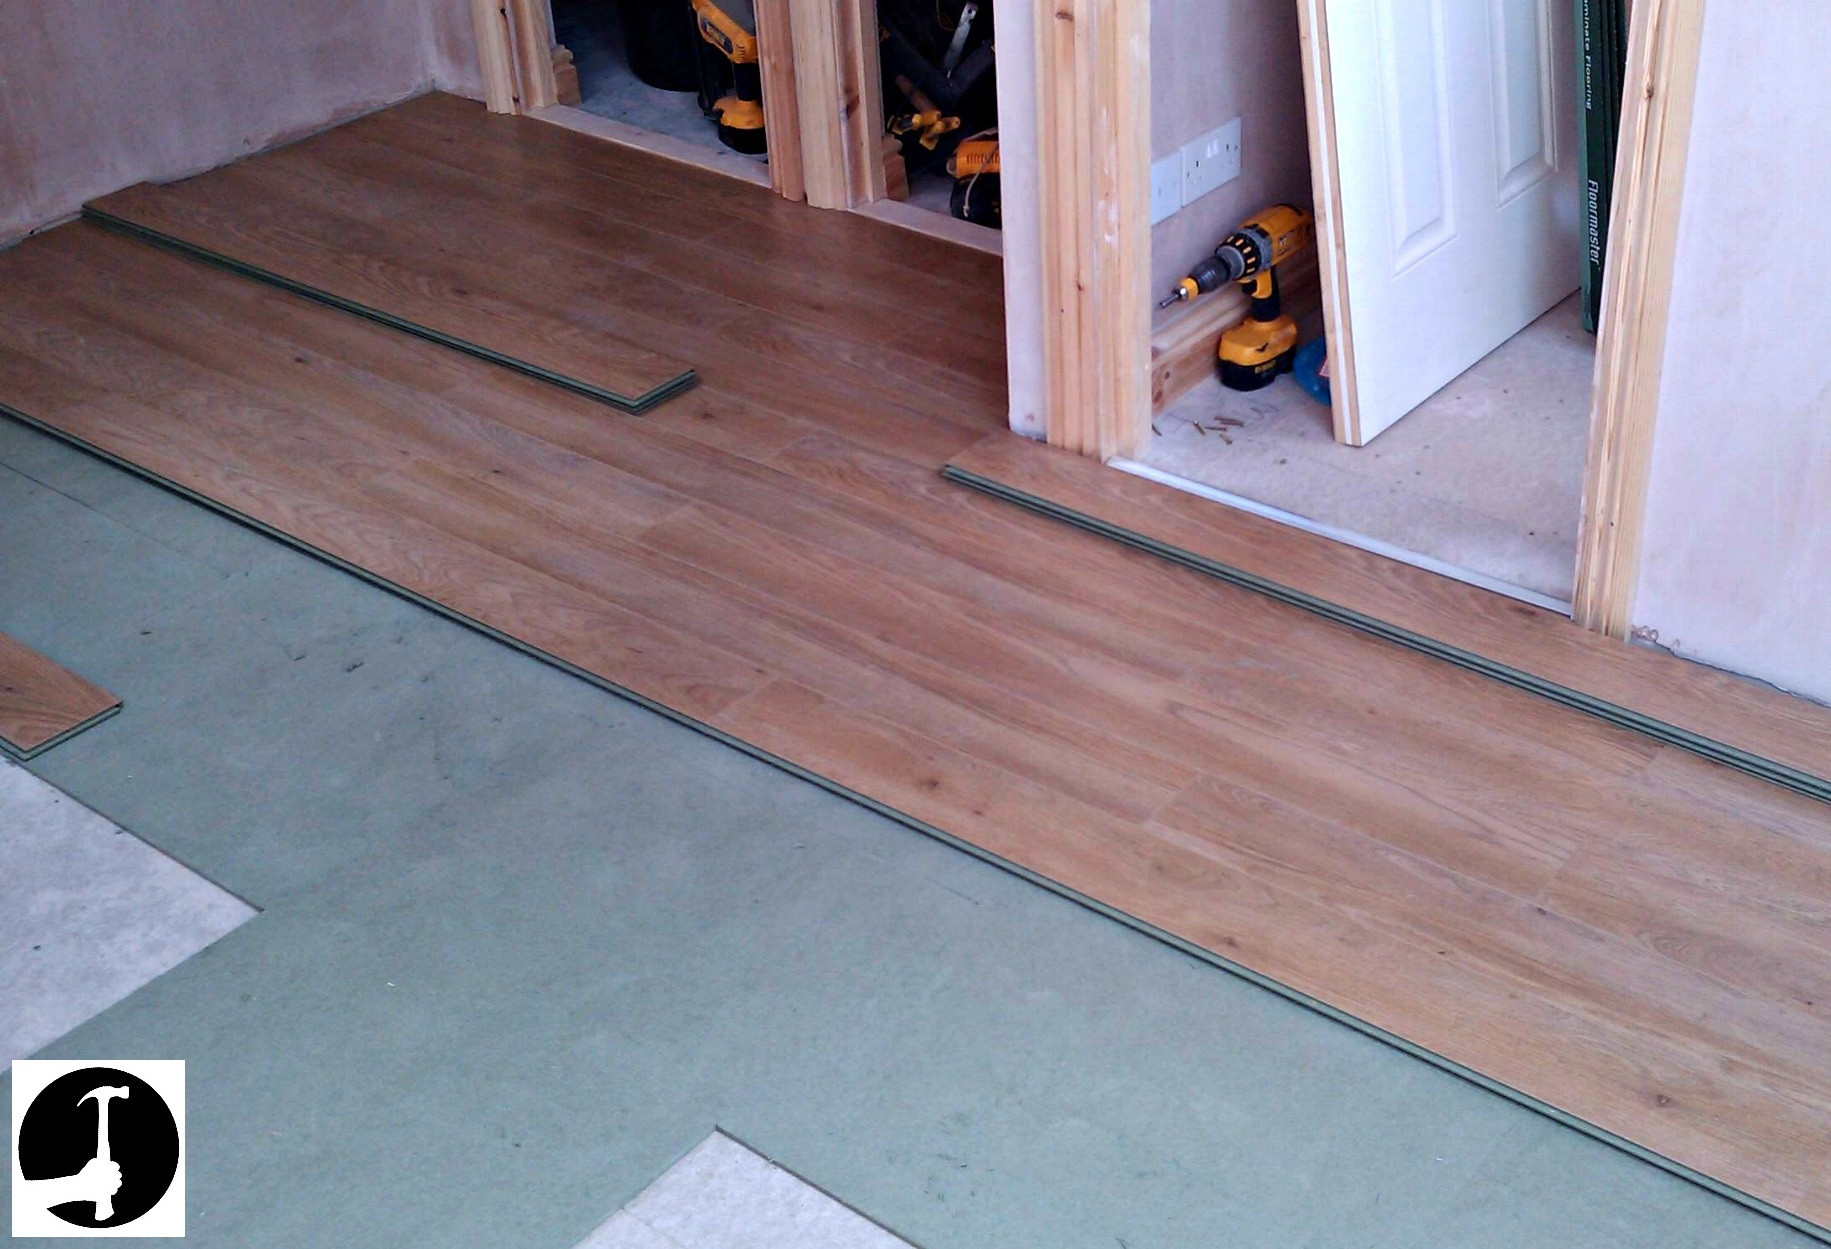 Laying Hardwood Floor On Concrete Of How to Install Laminate Flooring with Ease Glued Glue Less Systems Intended for Laminate Started